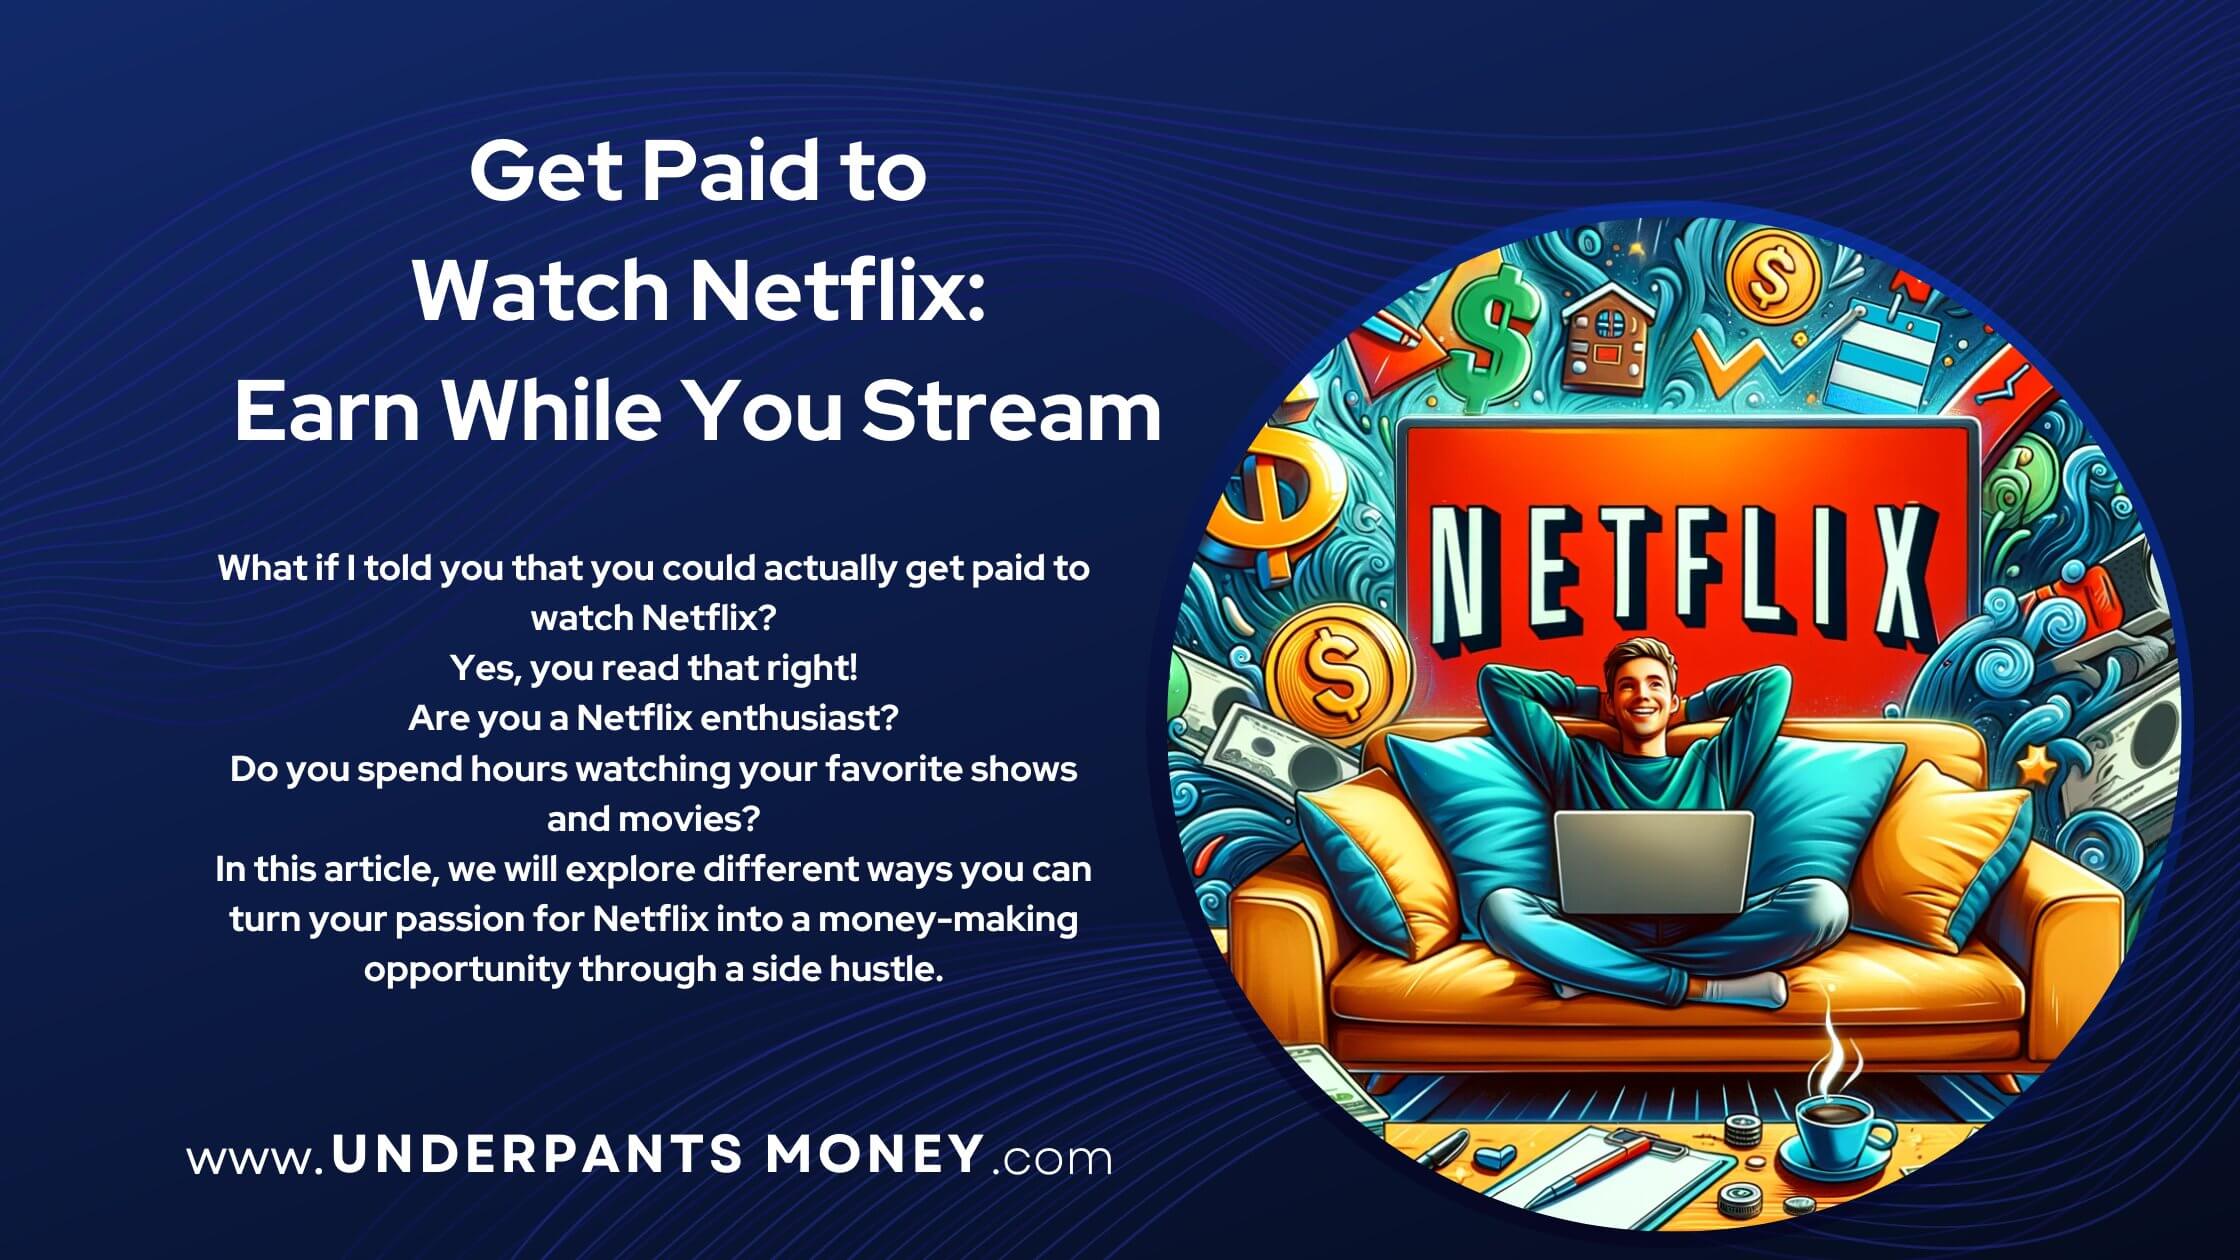 get paid to watch netflix title with description on blue with man on couch with netflix on screen to the right